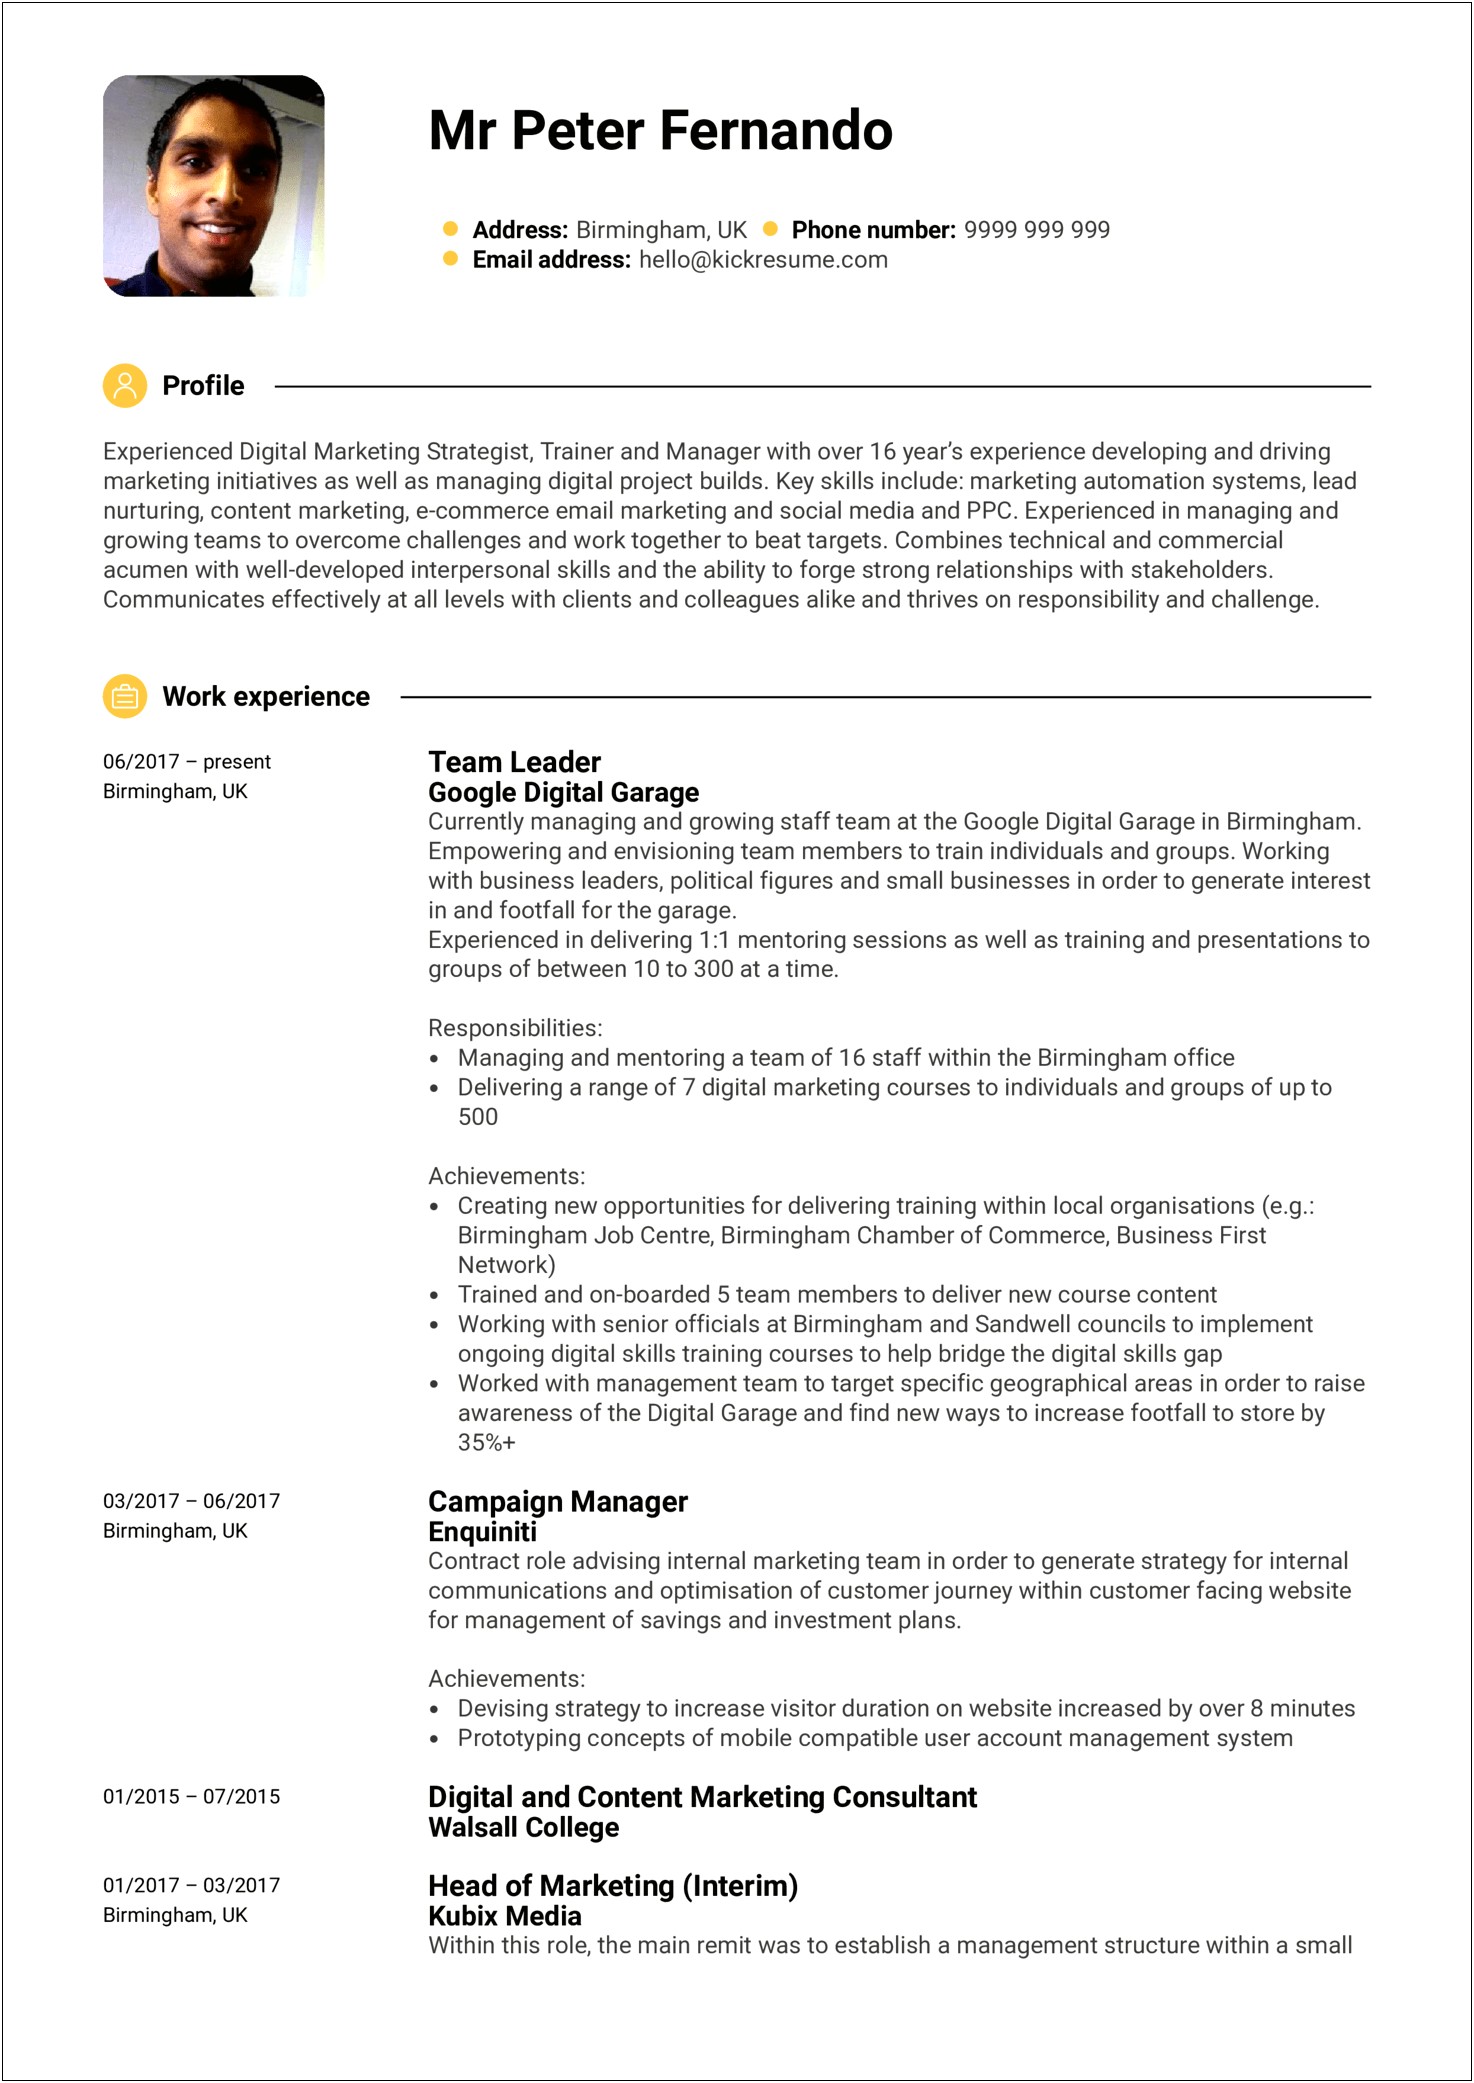 Resume Summary Of Qualifications For Leadership